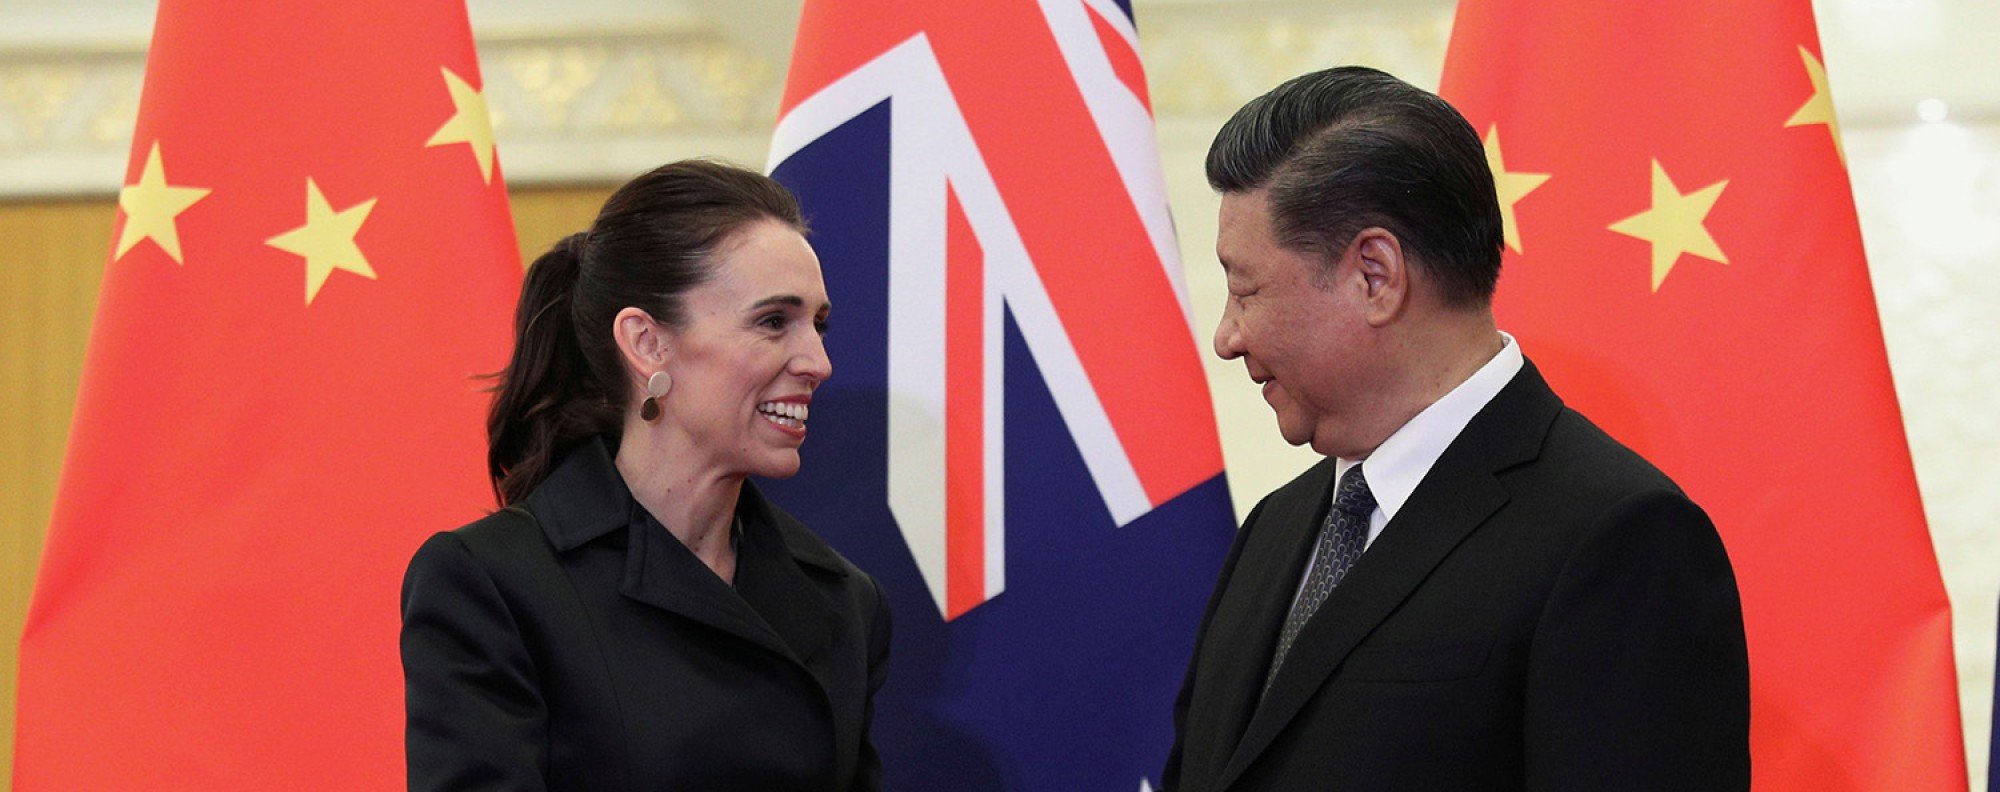 New Zealand Prime Minister Jacinda Ardern and Chinese President Xi Jinping shake hands in the Great Hall of the People in Beijing, China in 2019. Photo: Reuters